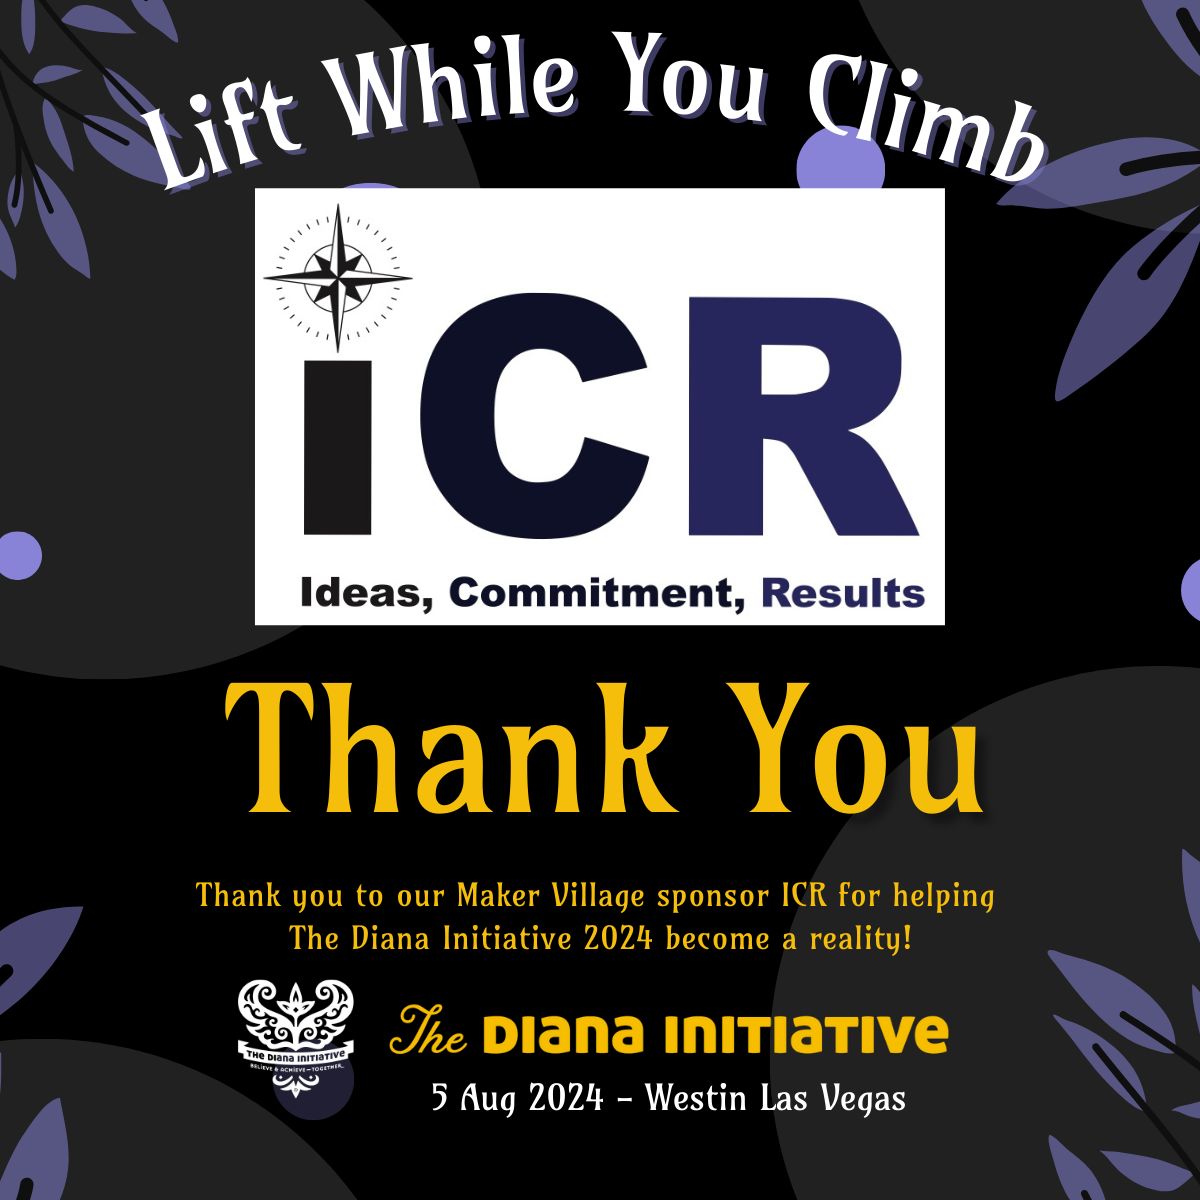 Thank you to ICR for sponsoring the Maker Village! buff.ly/3Jhq6ui #TDI2024 #LiftWhileYouClimb